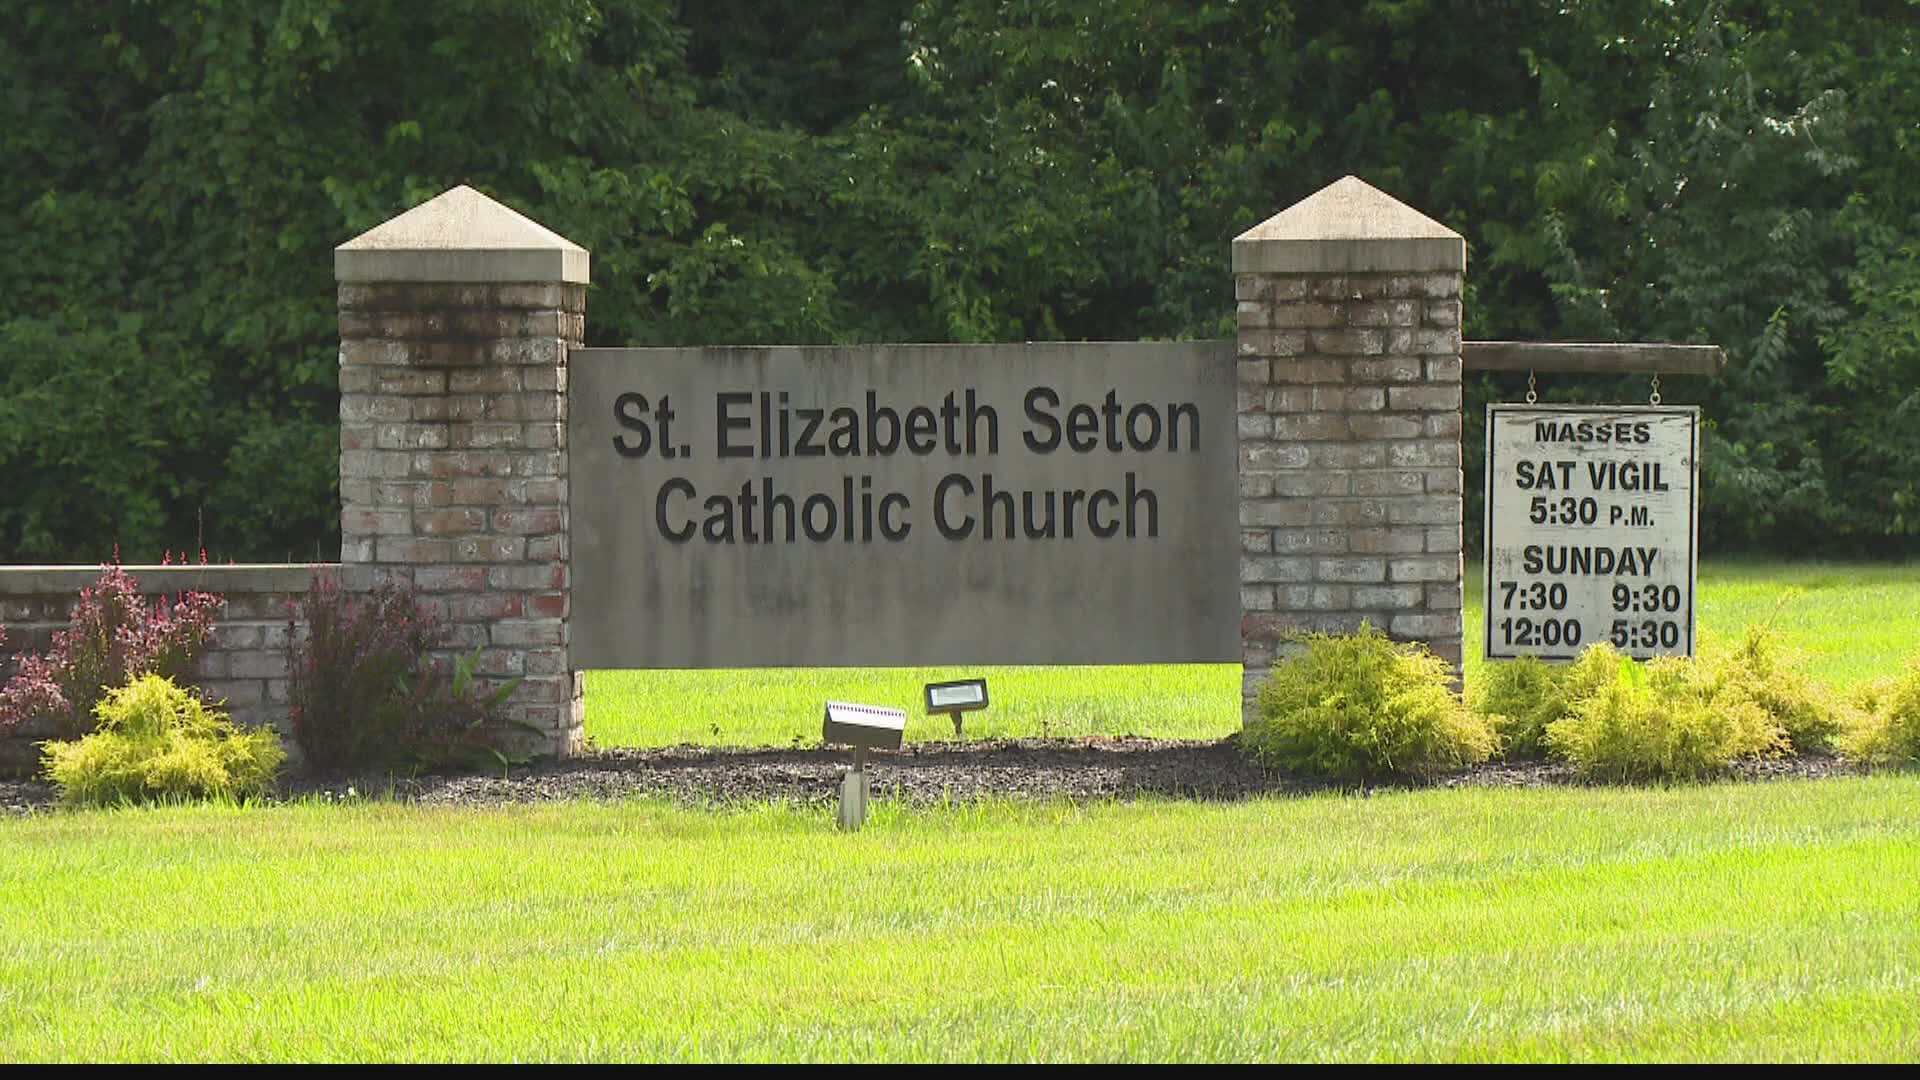 Father Ted Rothrock initially wrote the comments in a message on the website for St. Elizabeth Seton Catholic Church on June 28.